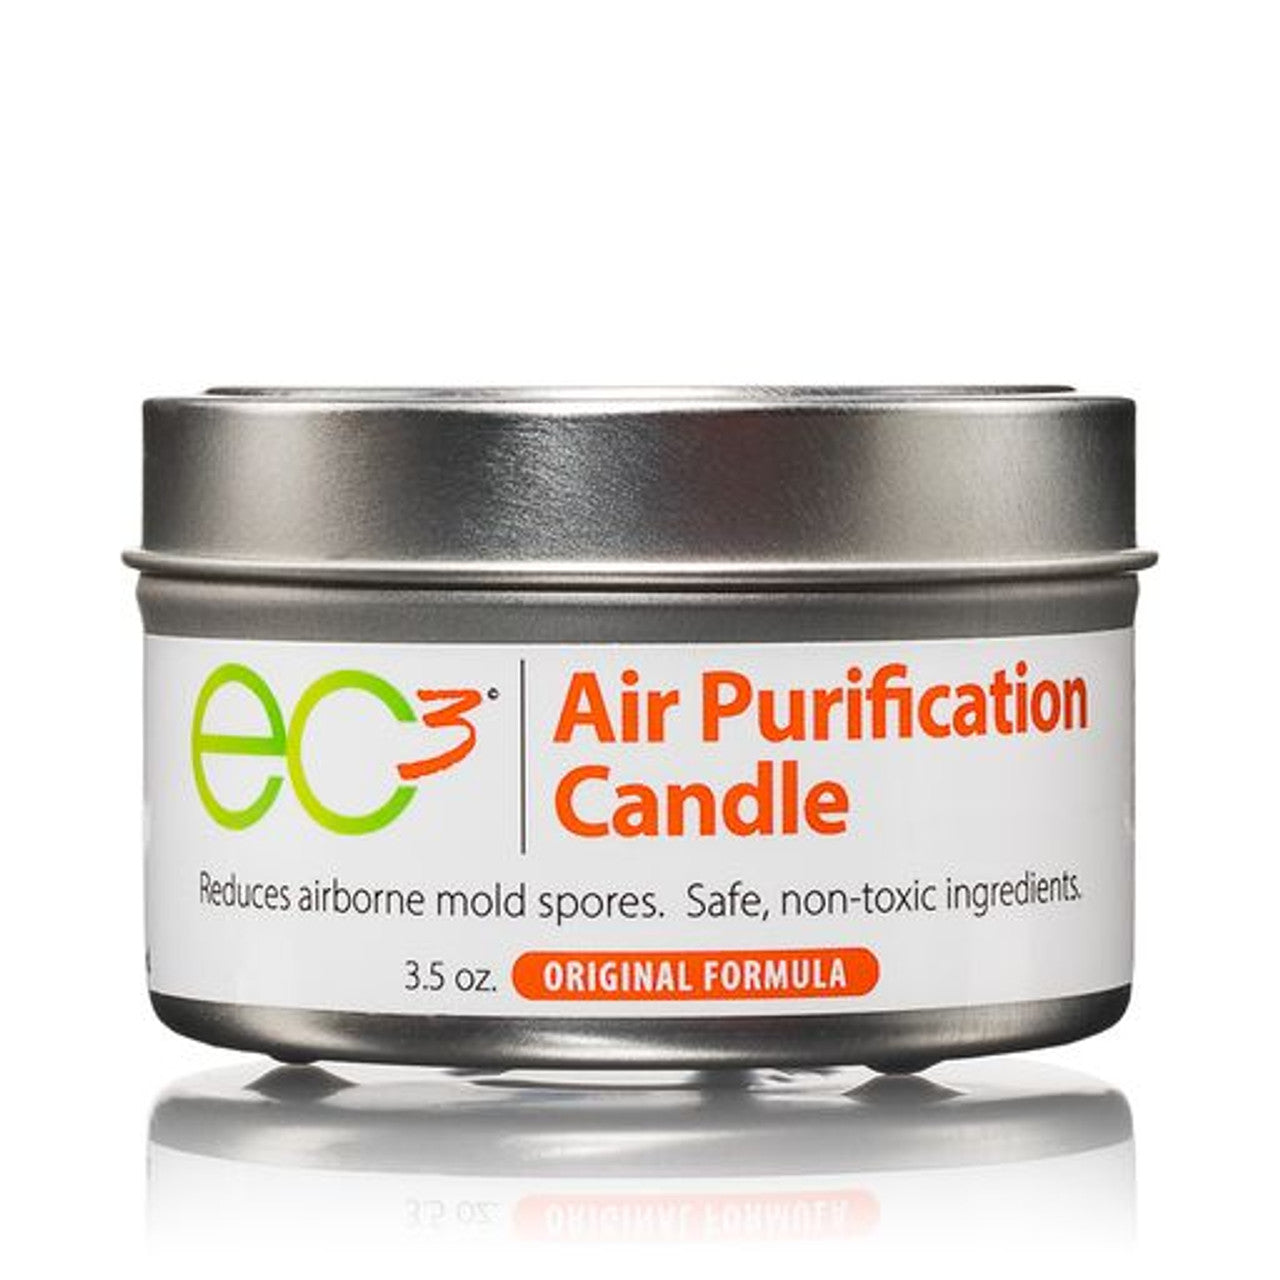 EC3 AIR PURIFICATION CANDLE